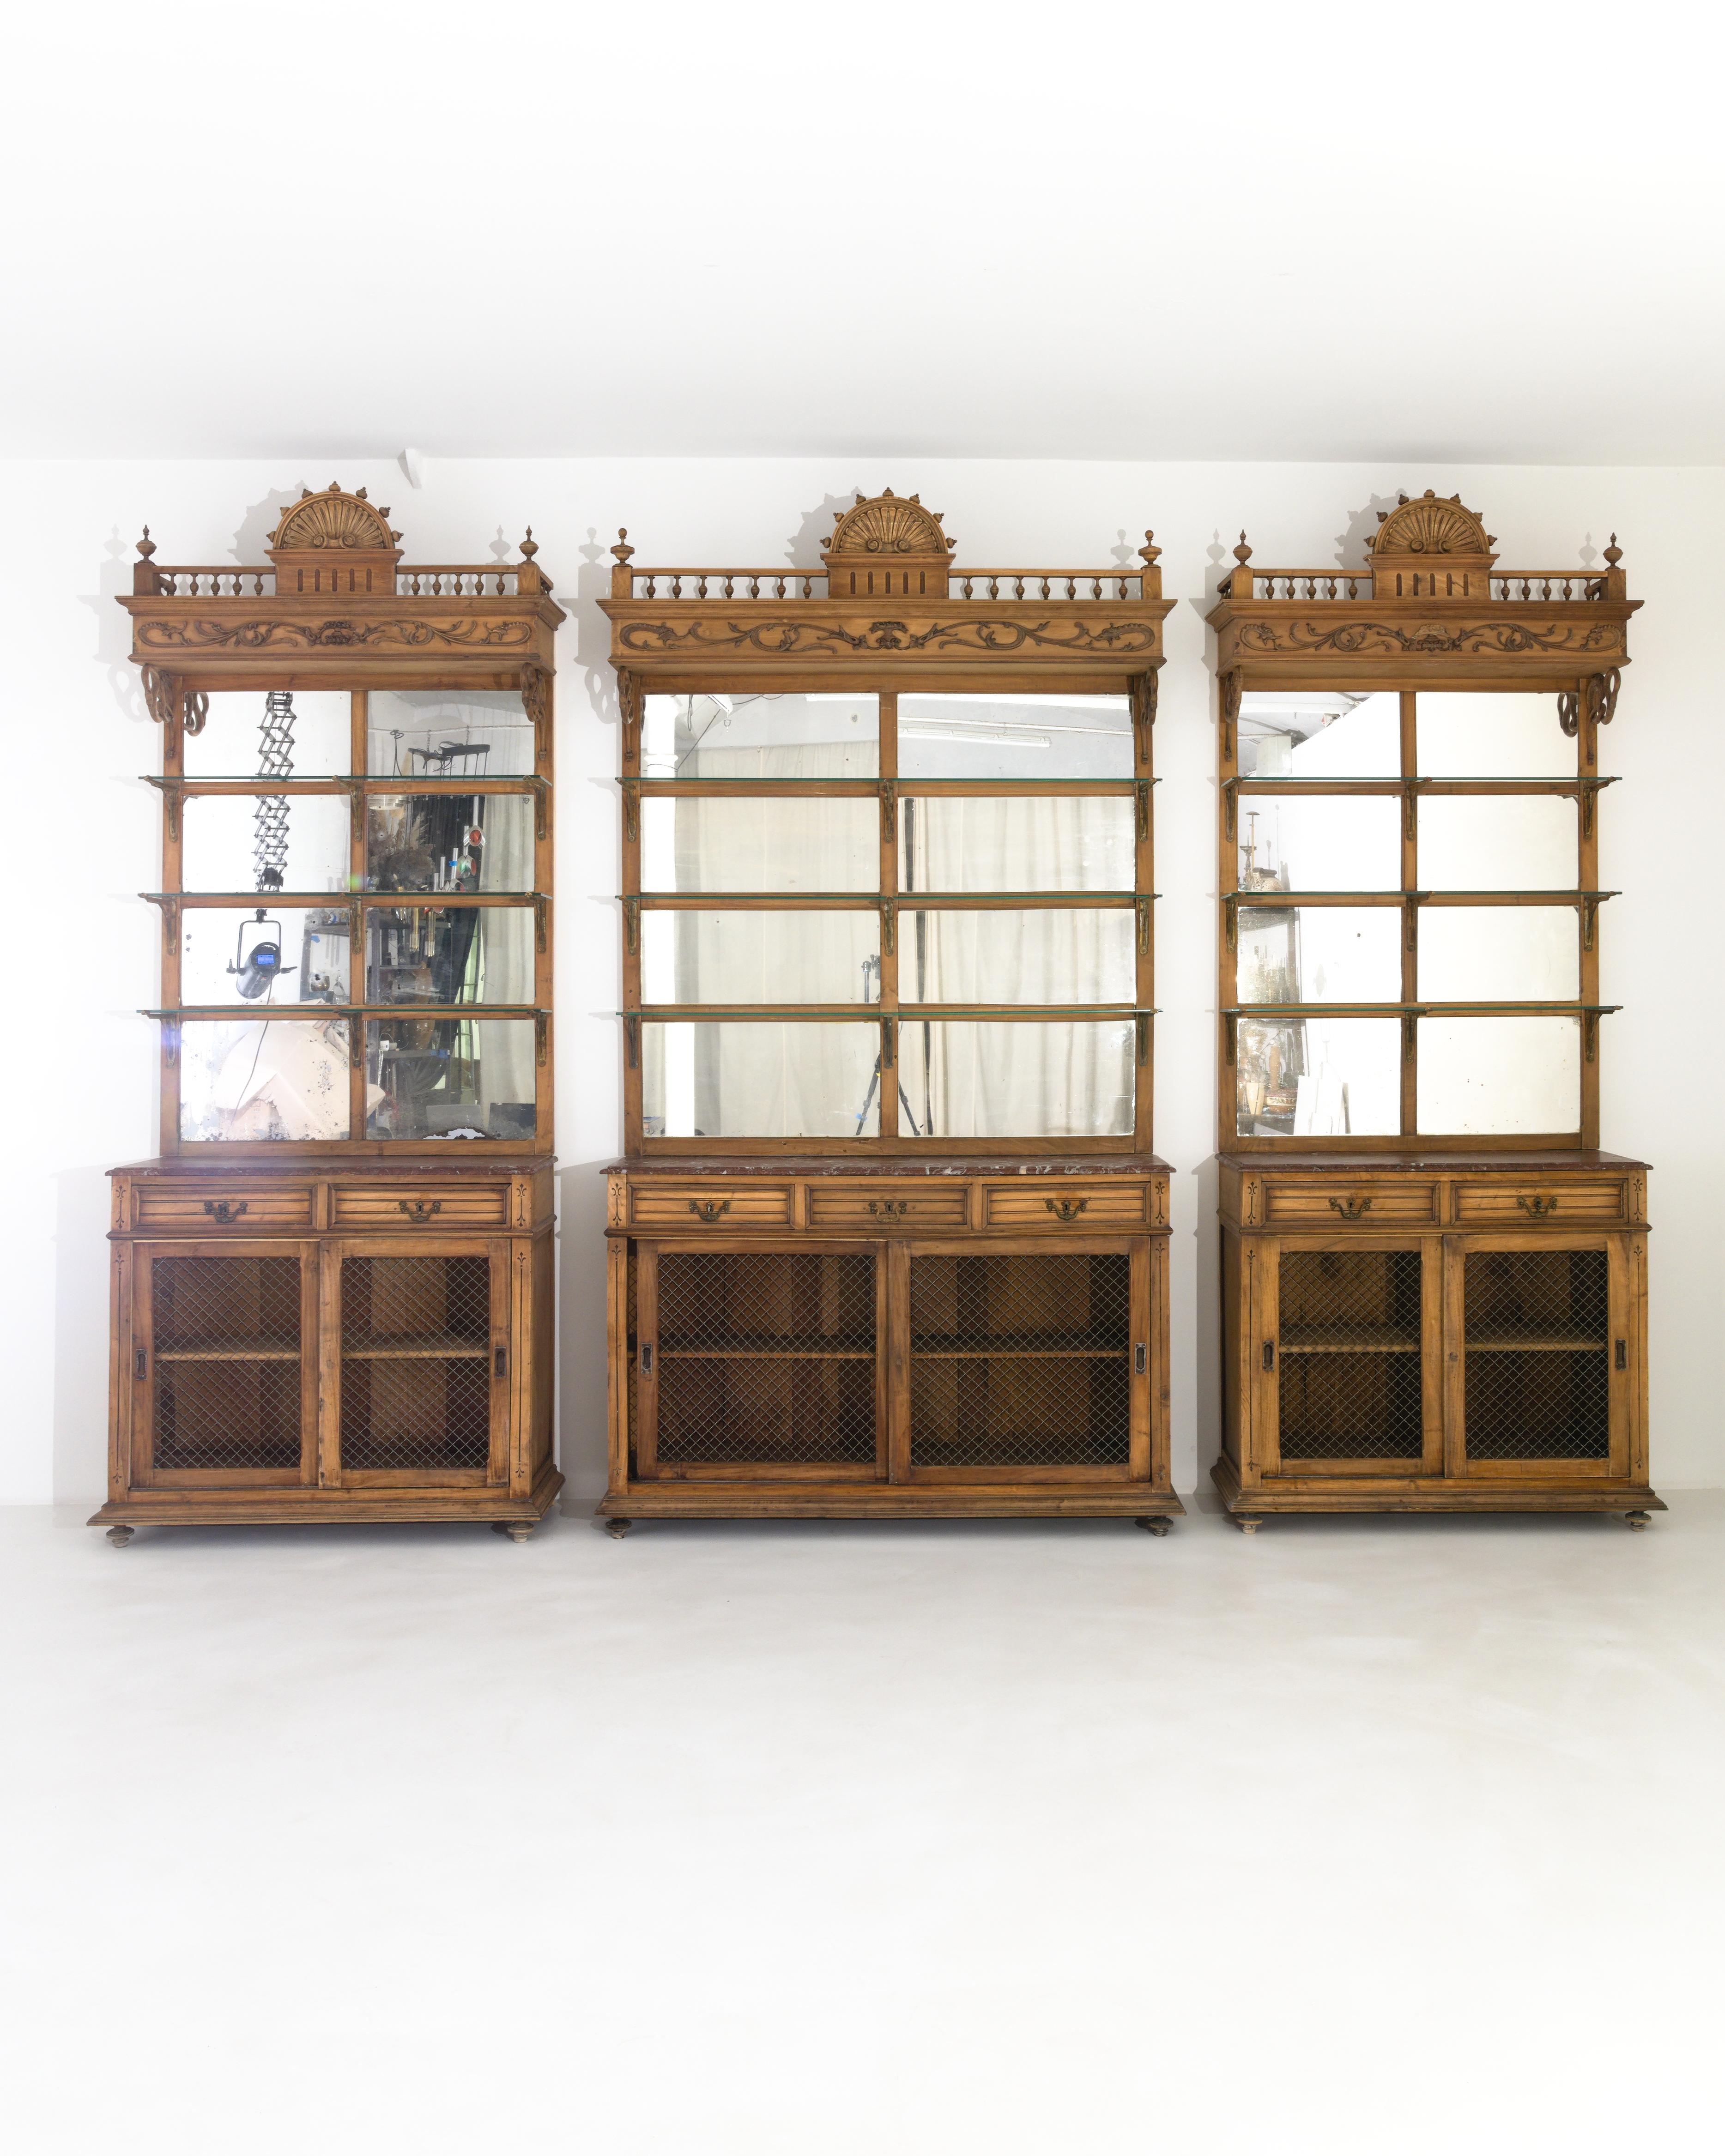 This trio of wooden display cabinets combine a variety of decorative motifs into a wonderfully eclectic design. Made in France at the turn of the century, the mirrored panes of the back panel reflect the light within the room and onto the glass